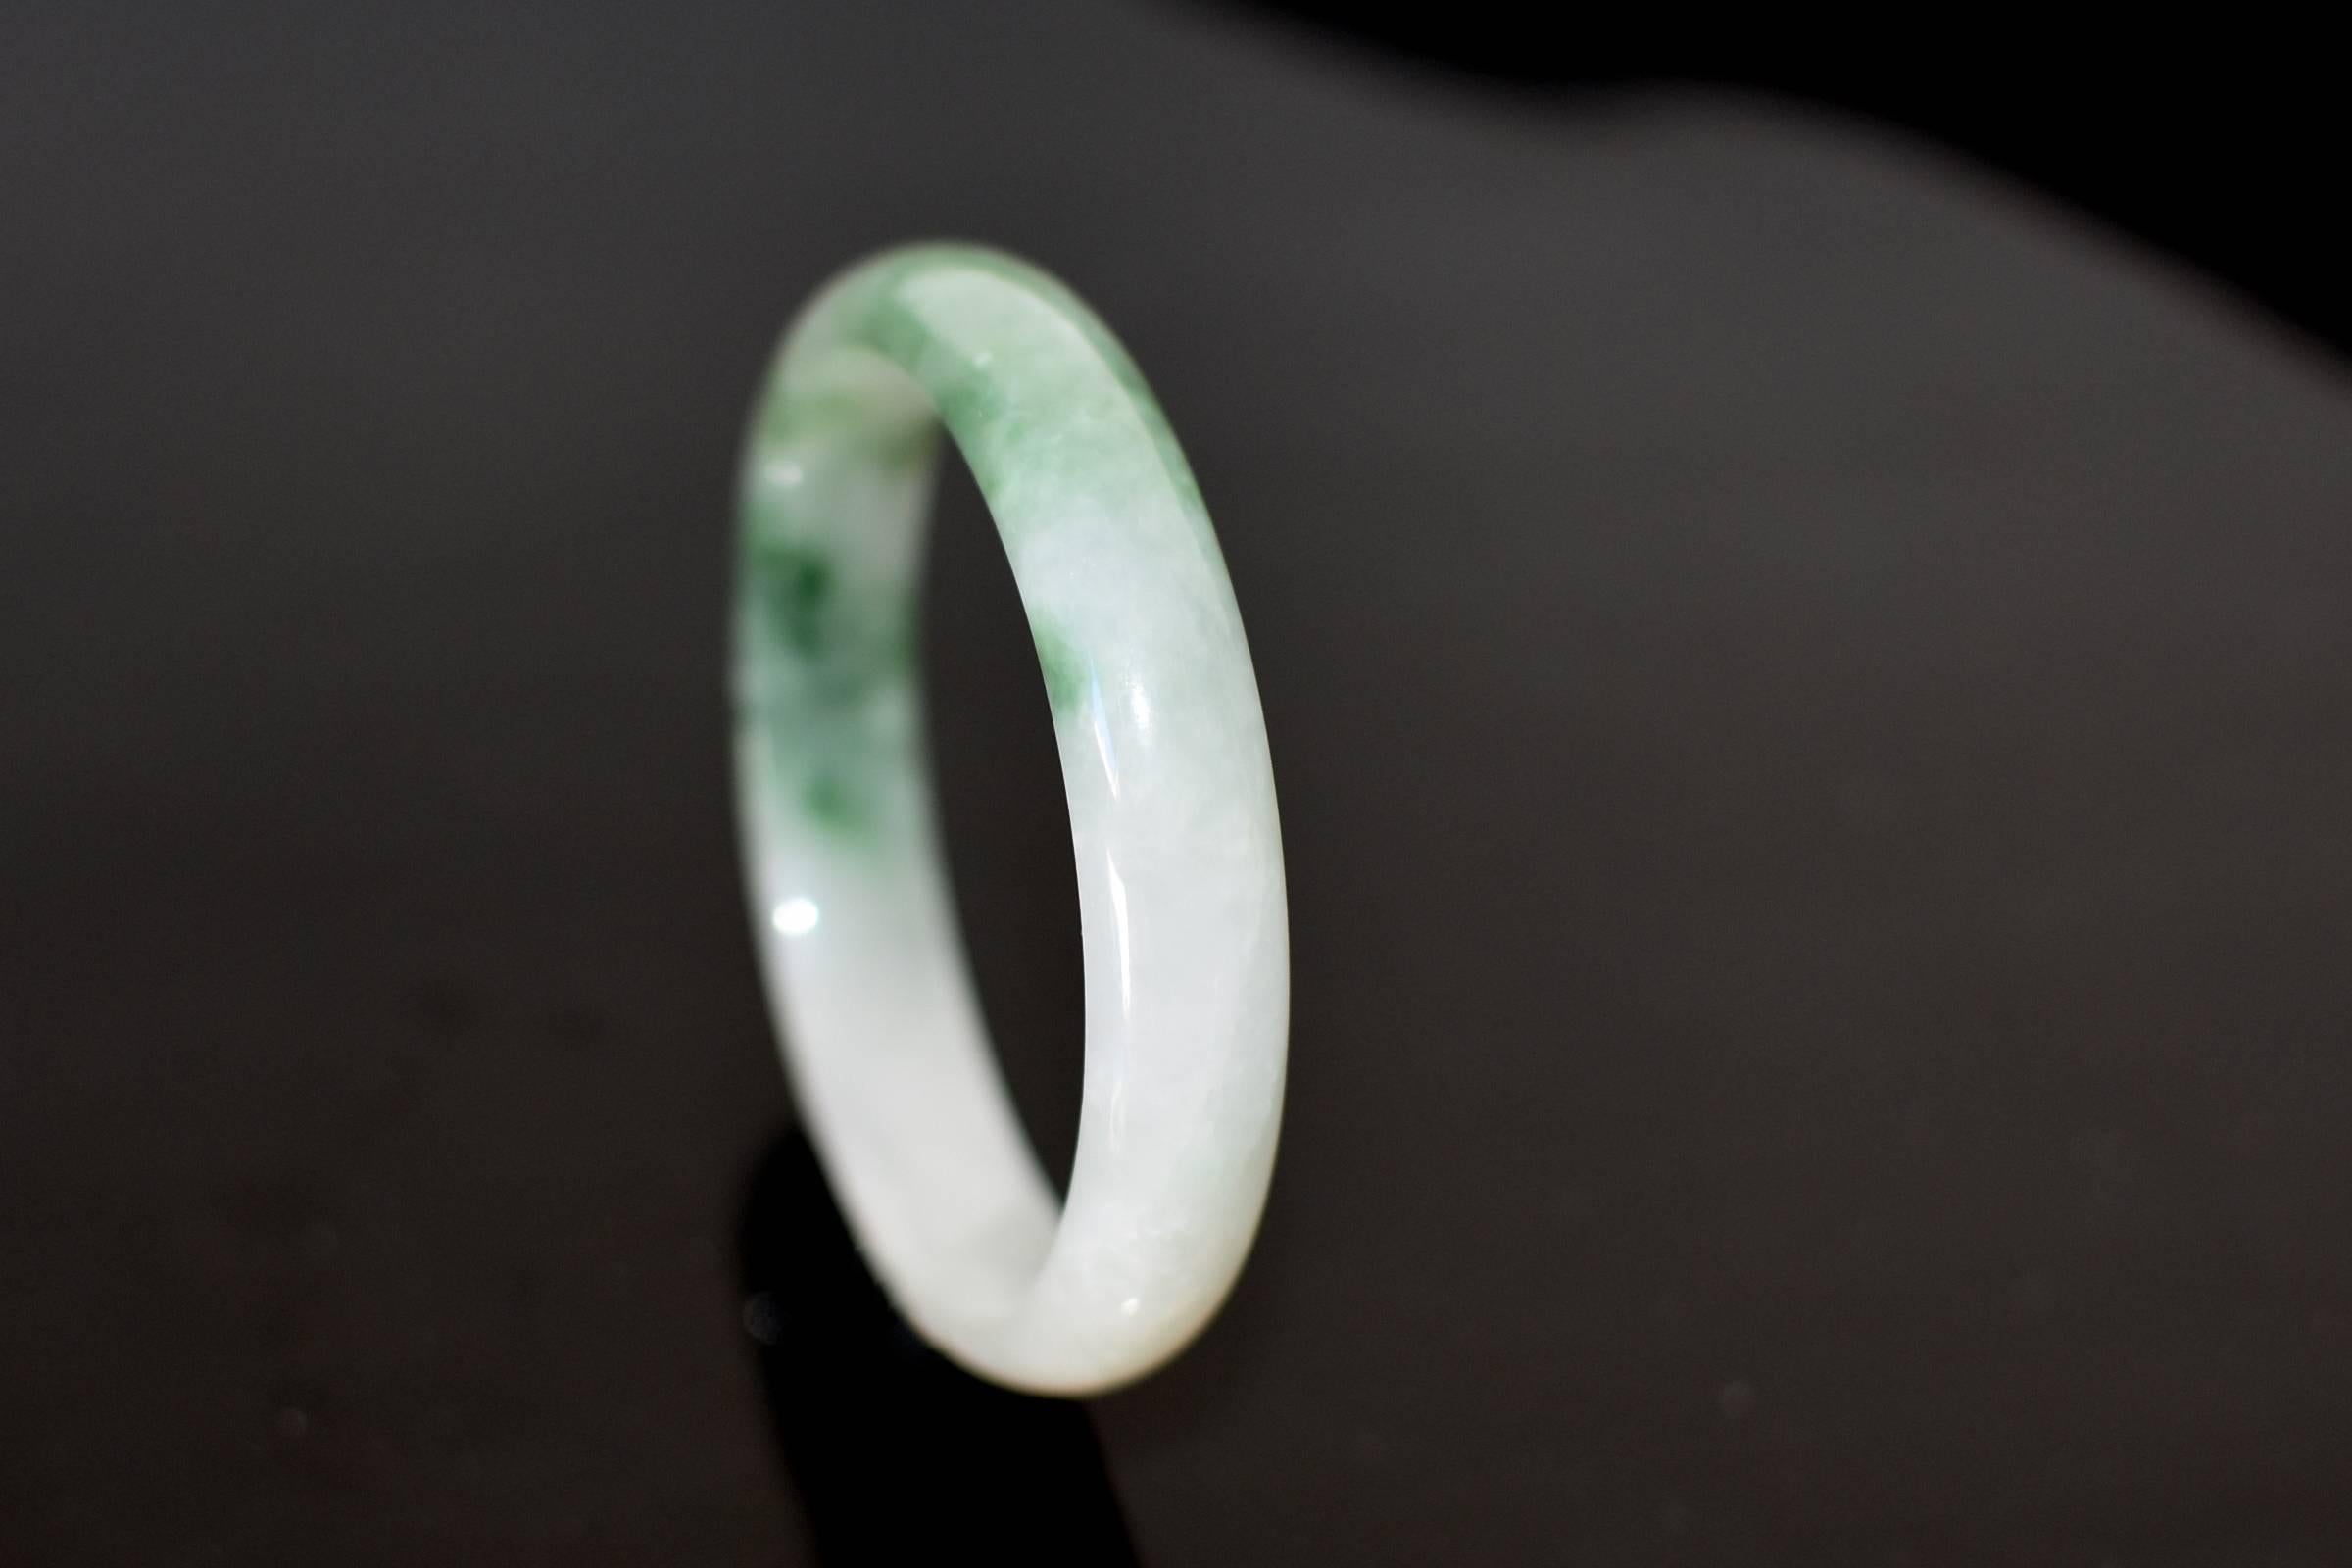 A beautiful, all natural jade bangle. The most lustrous white and romantic fluid moss green combine into one gorgeous color. Beautiful translucency and high gloss. The bangle is perfectly smooth and luxurious to touch. The inside is flat rather than